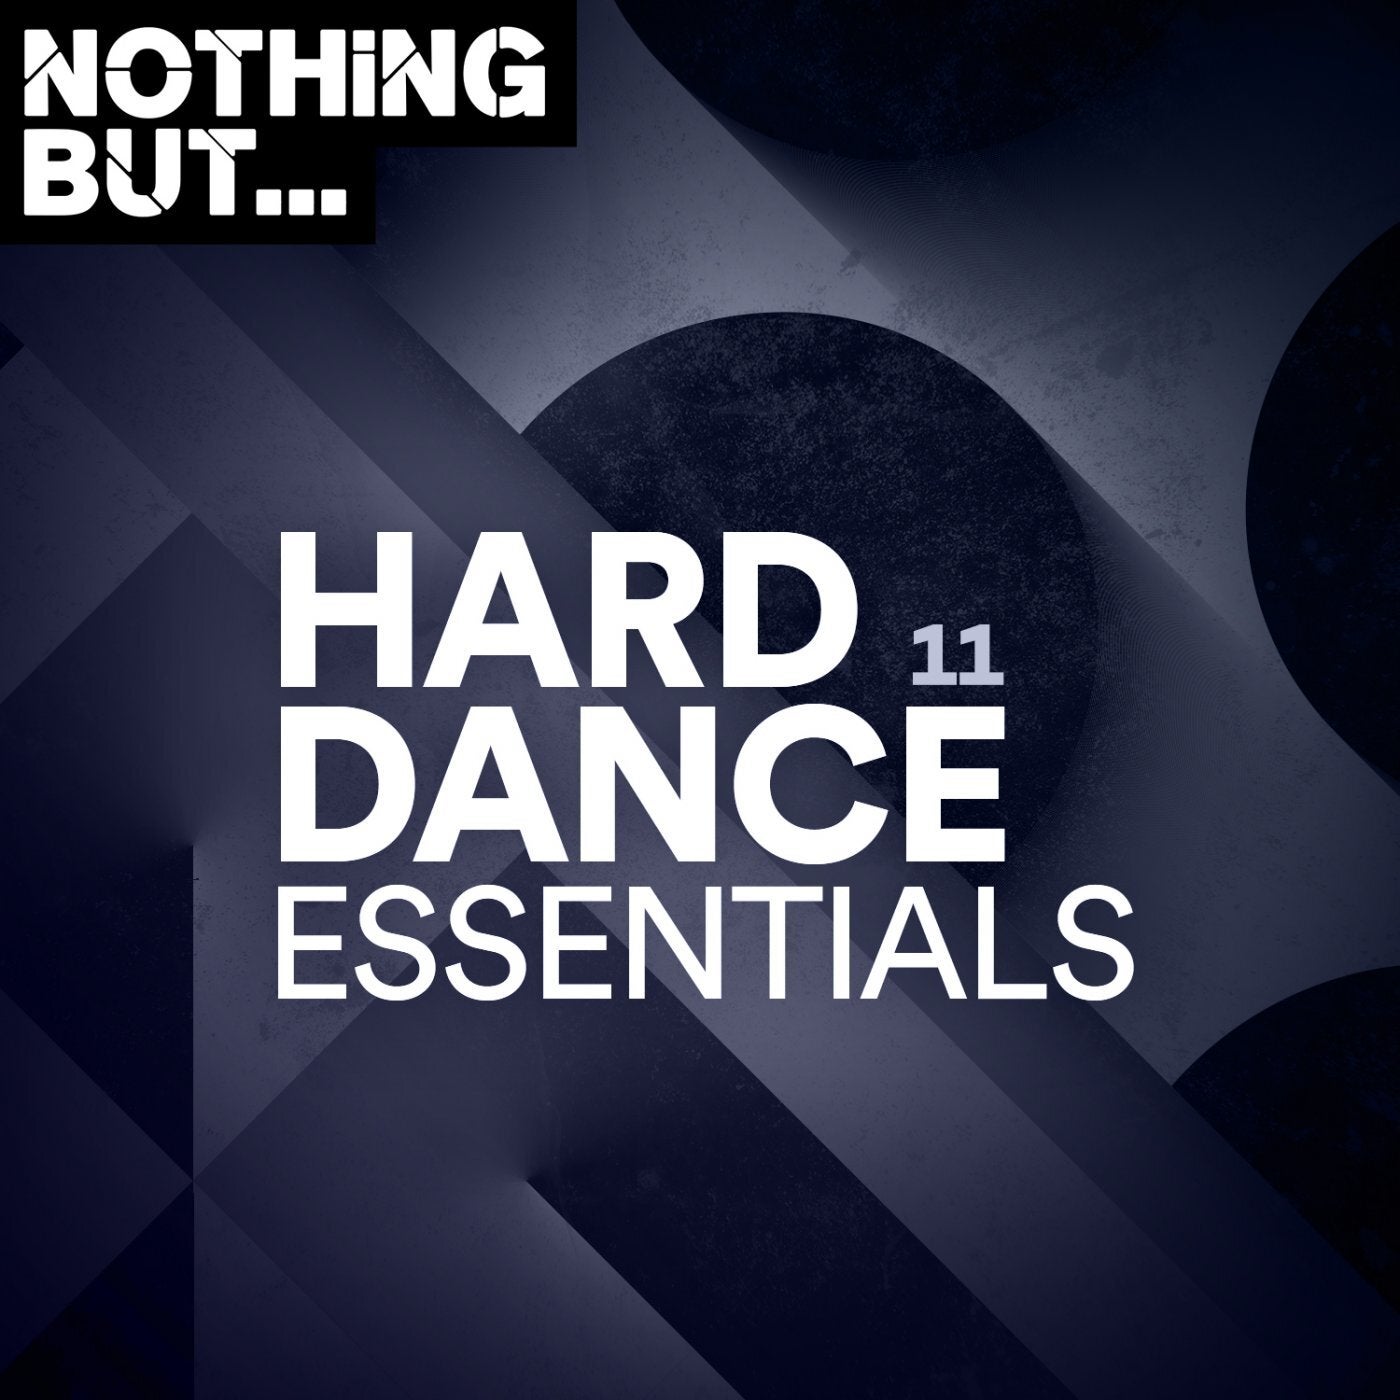 Nothing But... Hard Dance Essentials, Vol. 11